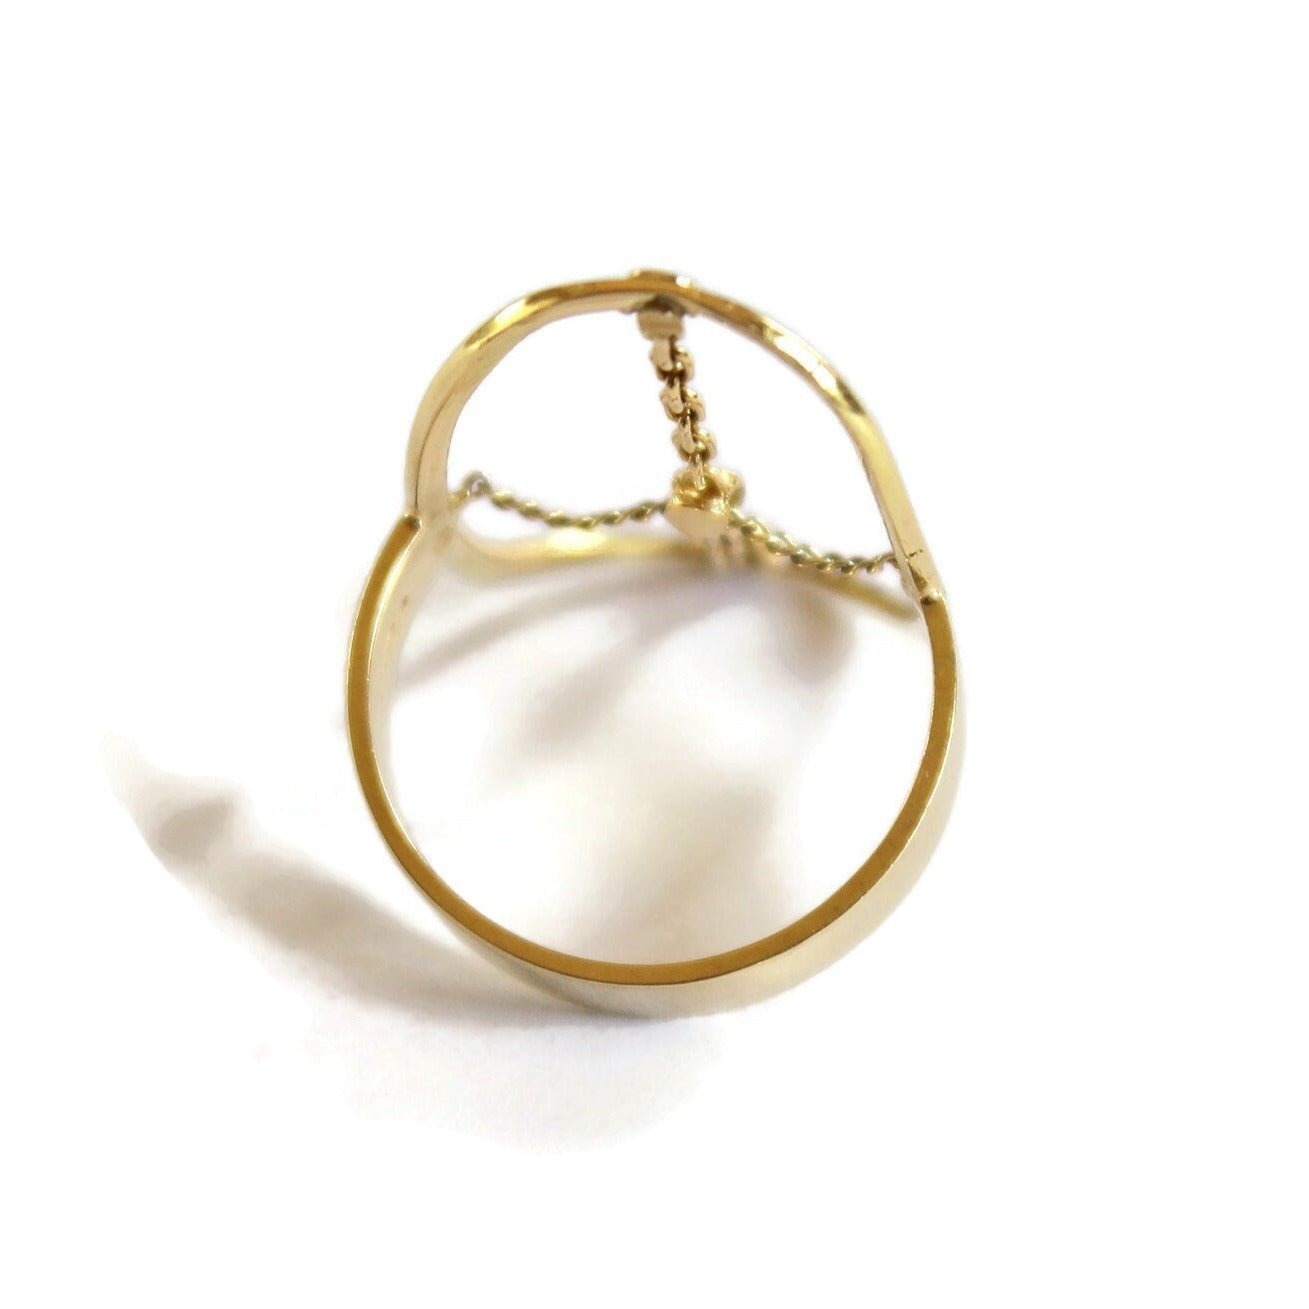 Handmade 18k Gold Oval Cocktail Ring - R. Mouzannar Jewelry